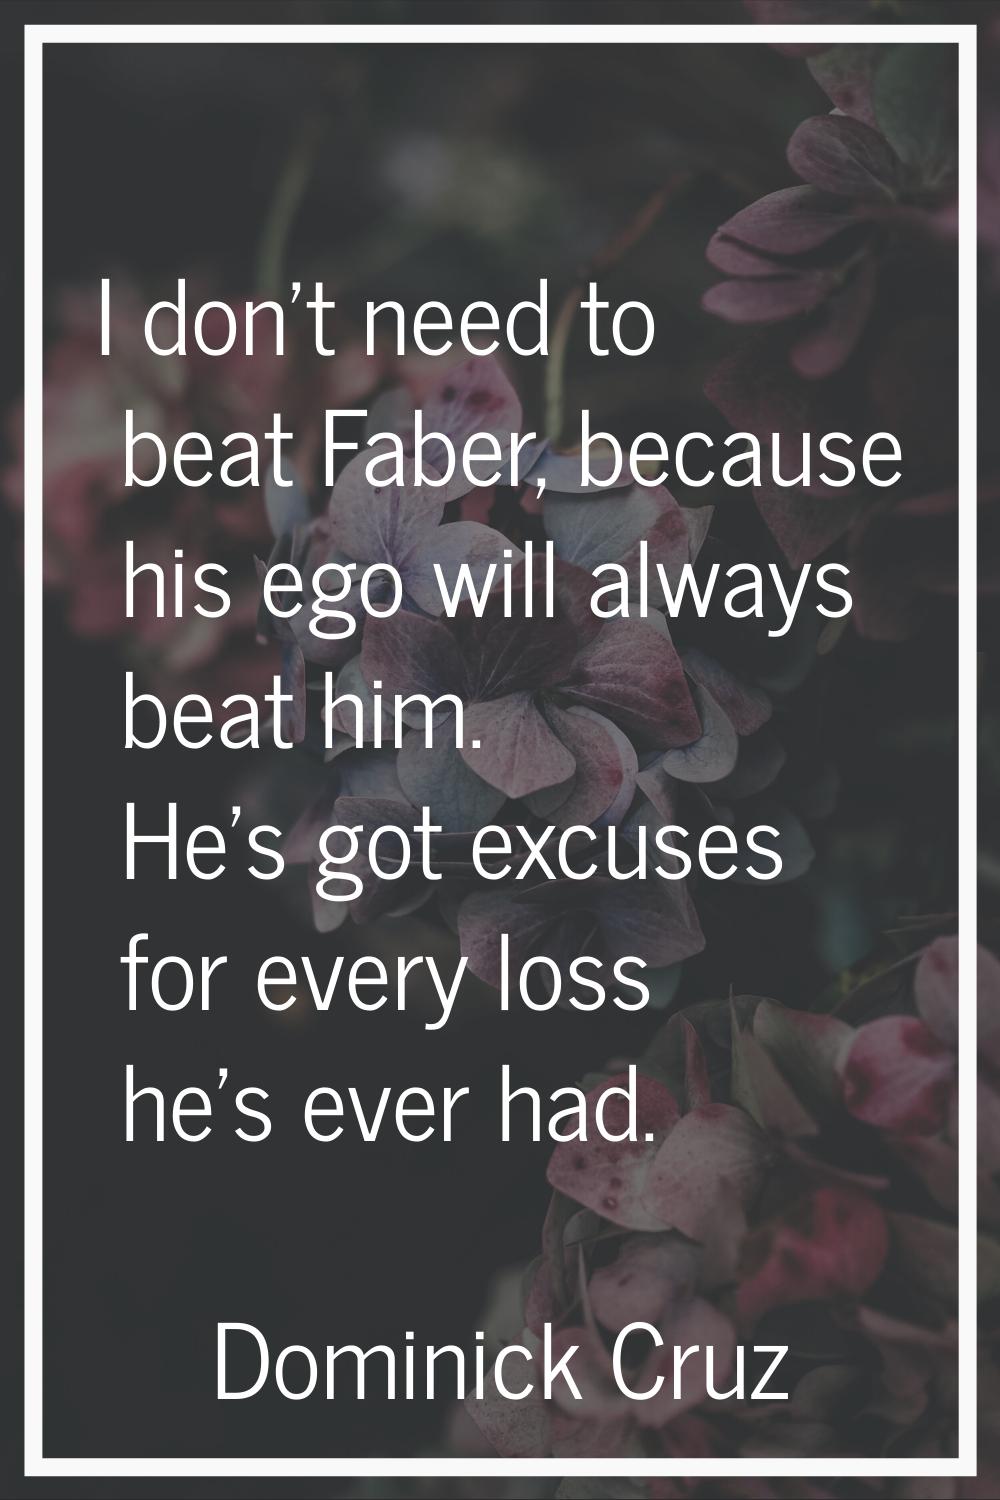 I don't need to beat Faber, because his ego will always beat him. He's got excuses for every loss h